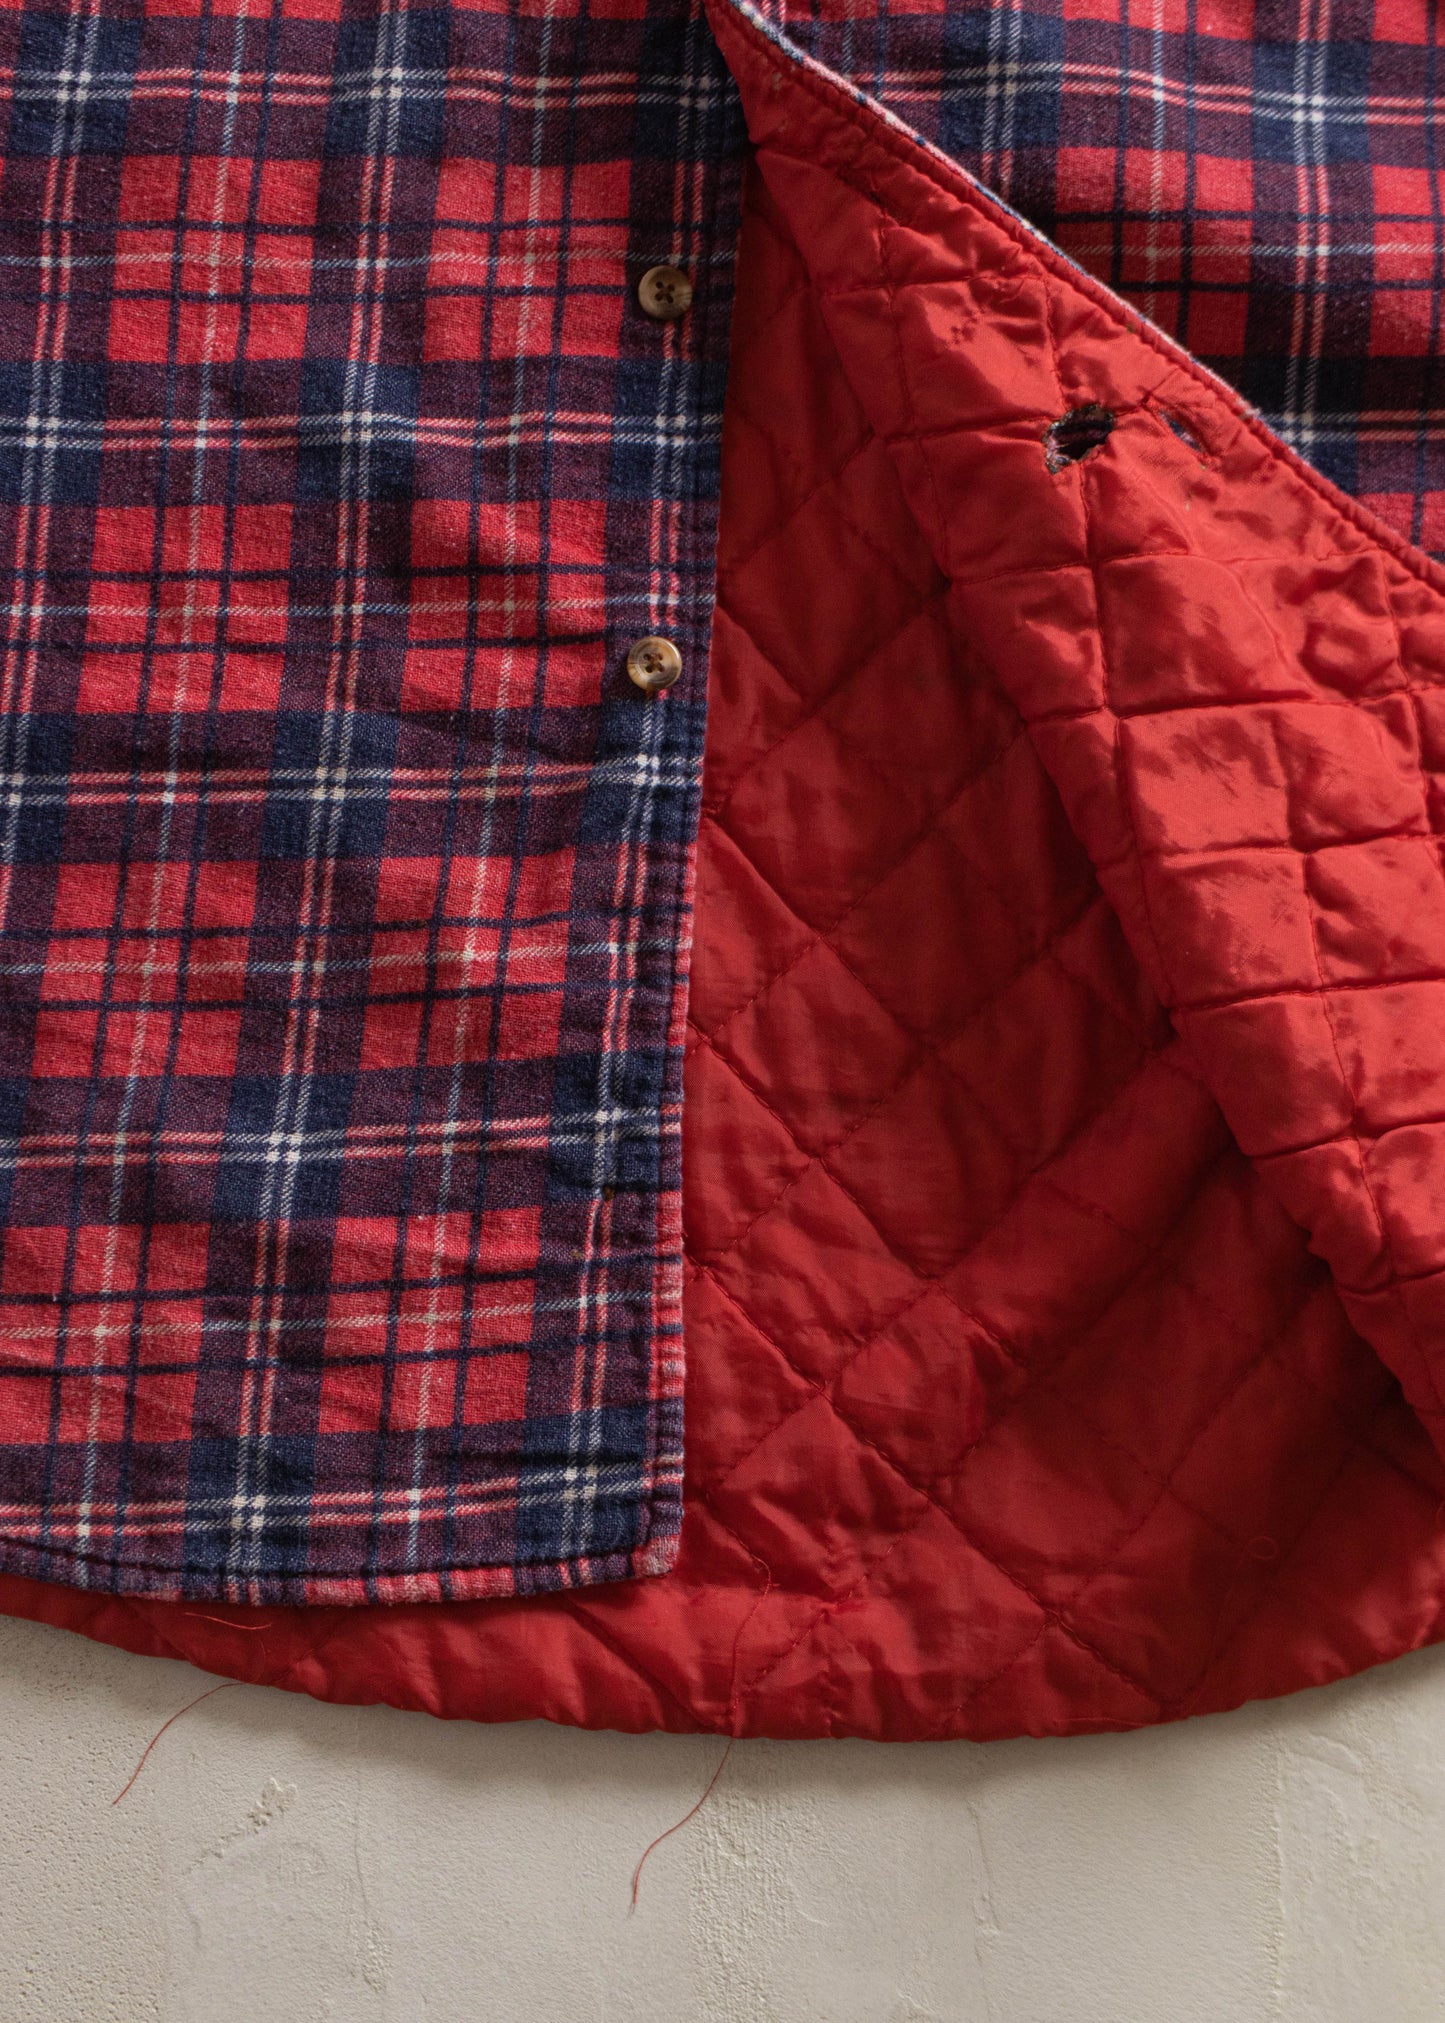 1990s Padded Cotton Flannel Jacket Size XL/2XL